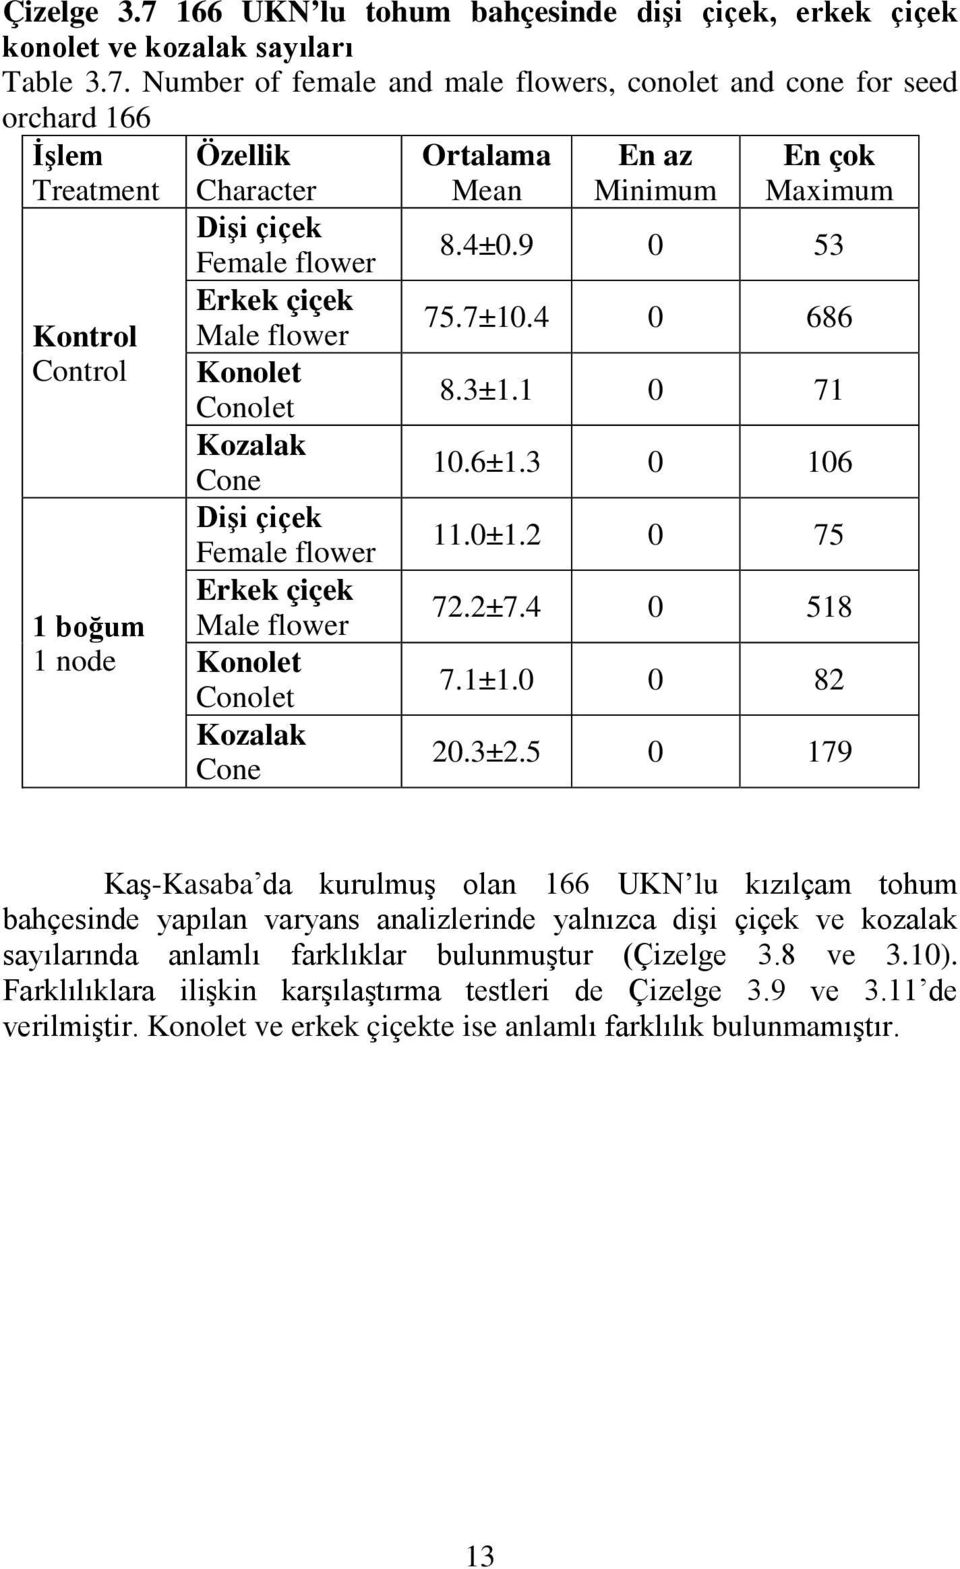 Number of female and male flowers, conolet and cone for seed orchard 166 İşlem Treatment Kontrol Control 1 boğum 1 node Özellik Character Dişi çiçek Female flower Erkek çiçek Male flower Konolet